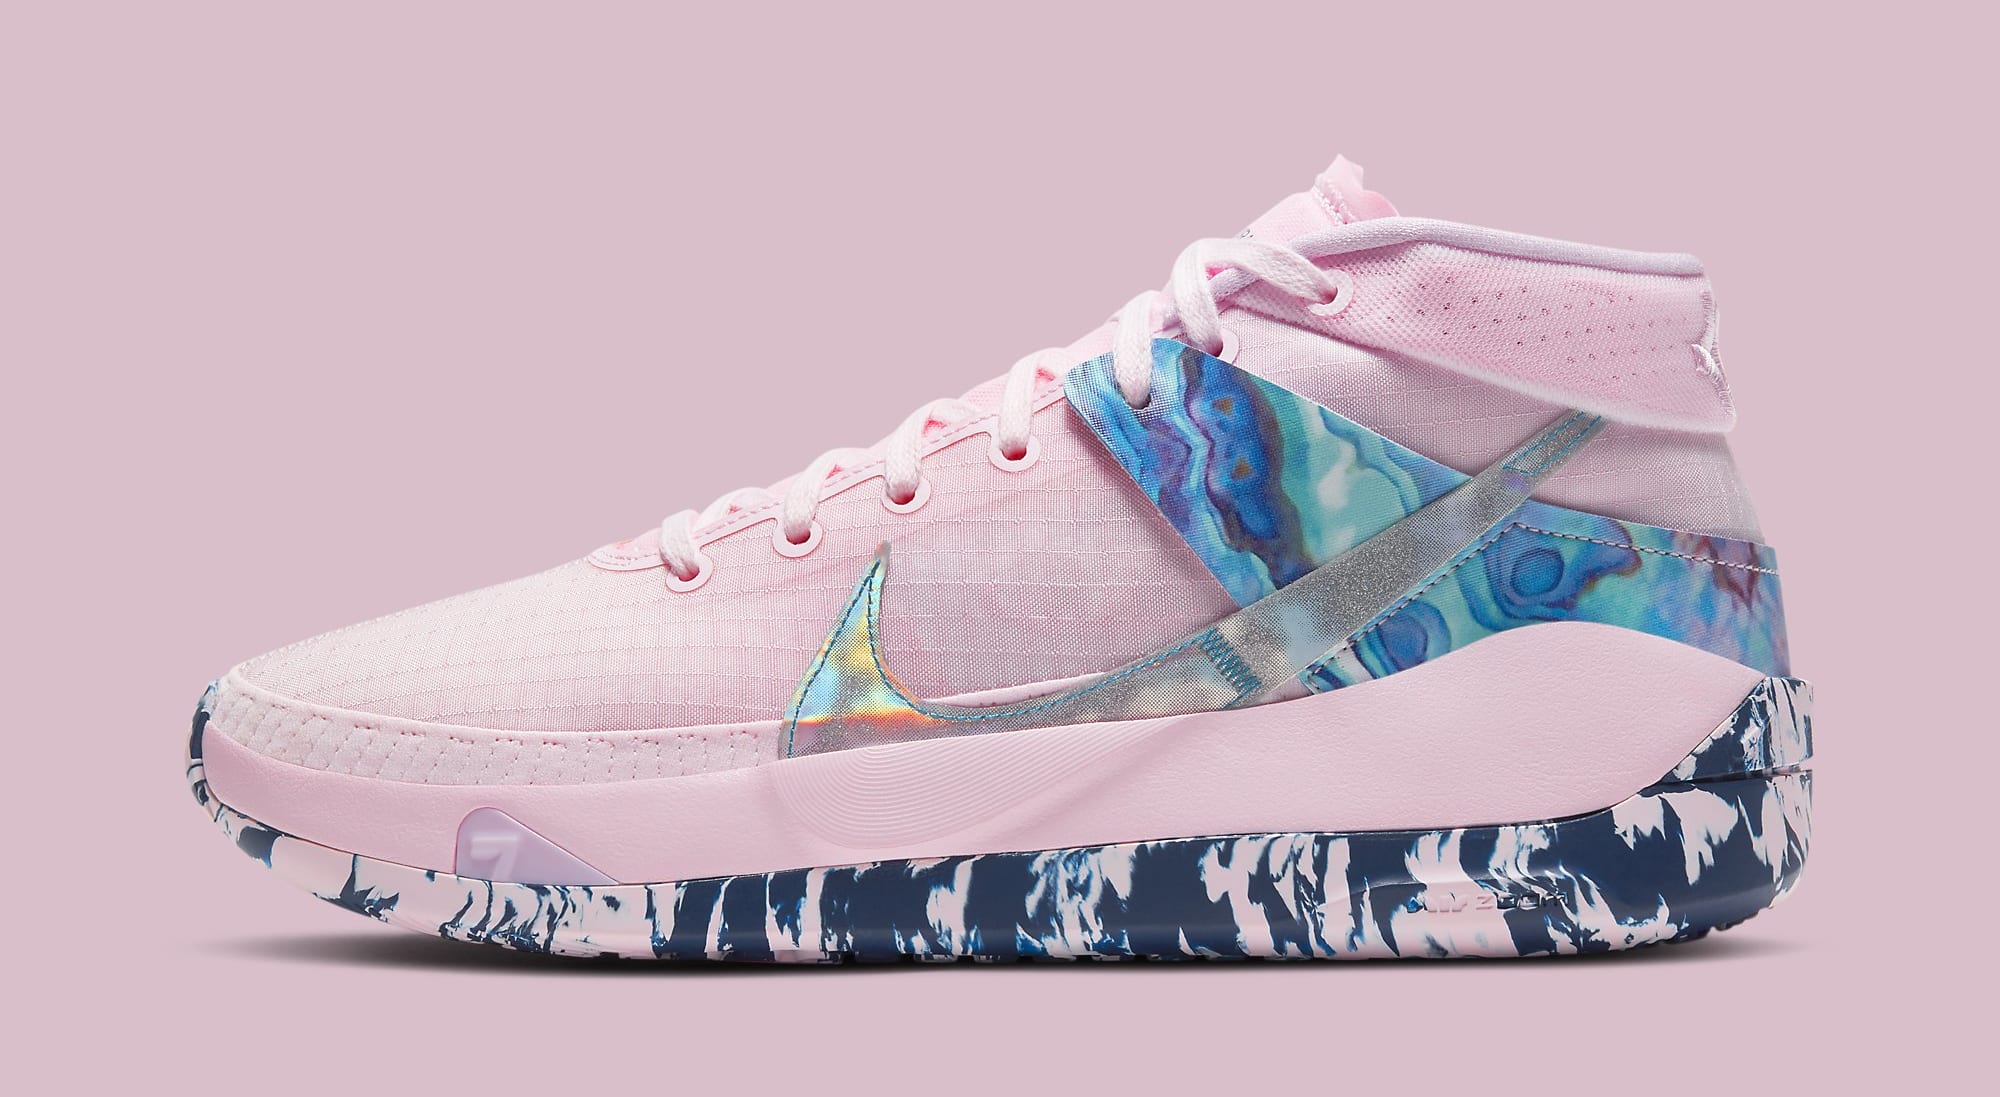 Nike KD 13 'Aunt Pearl' DC0011-600 Lateral